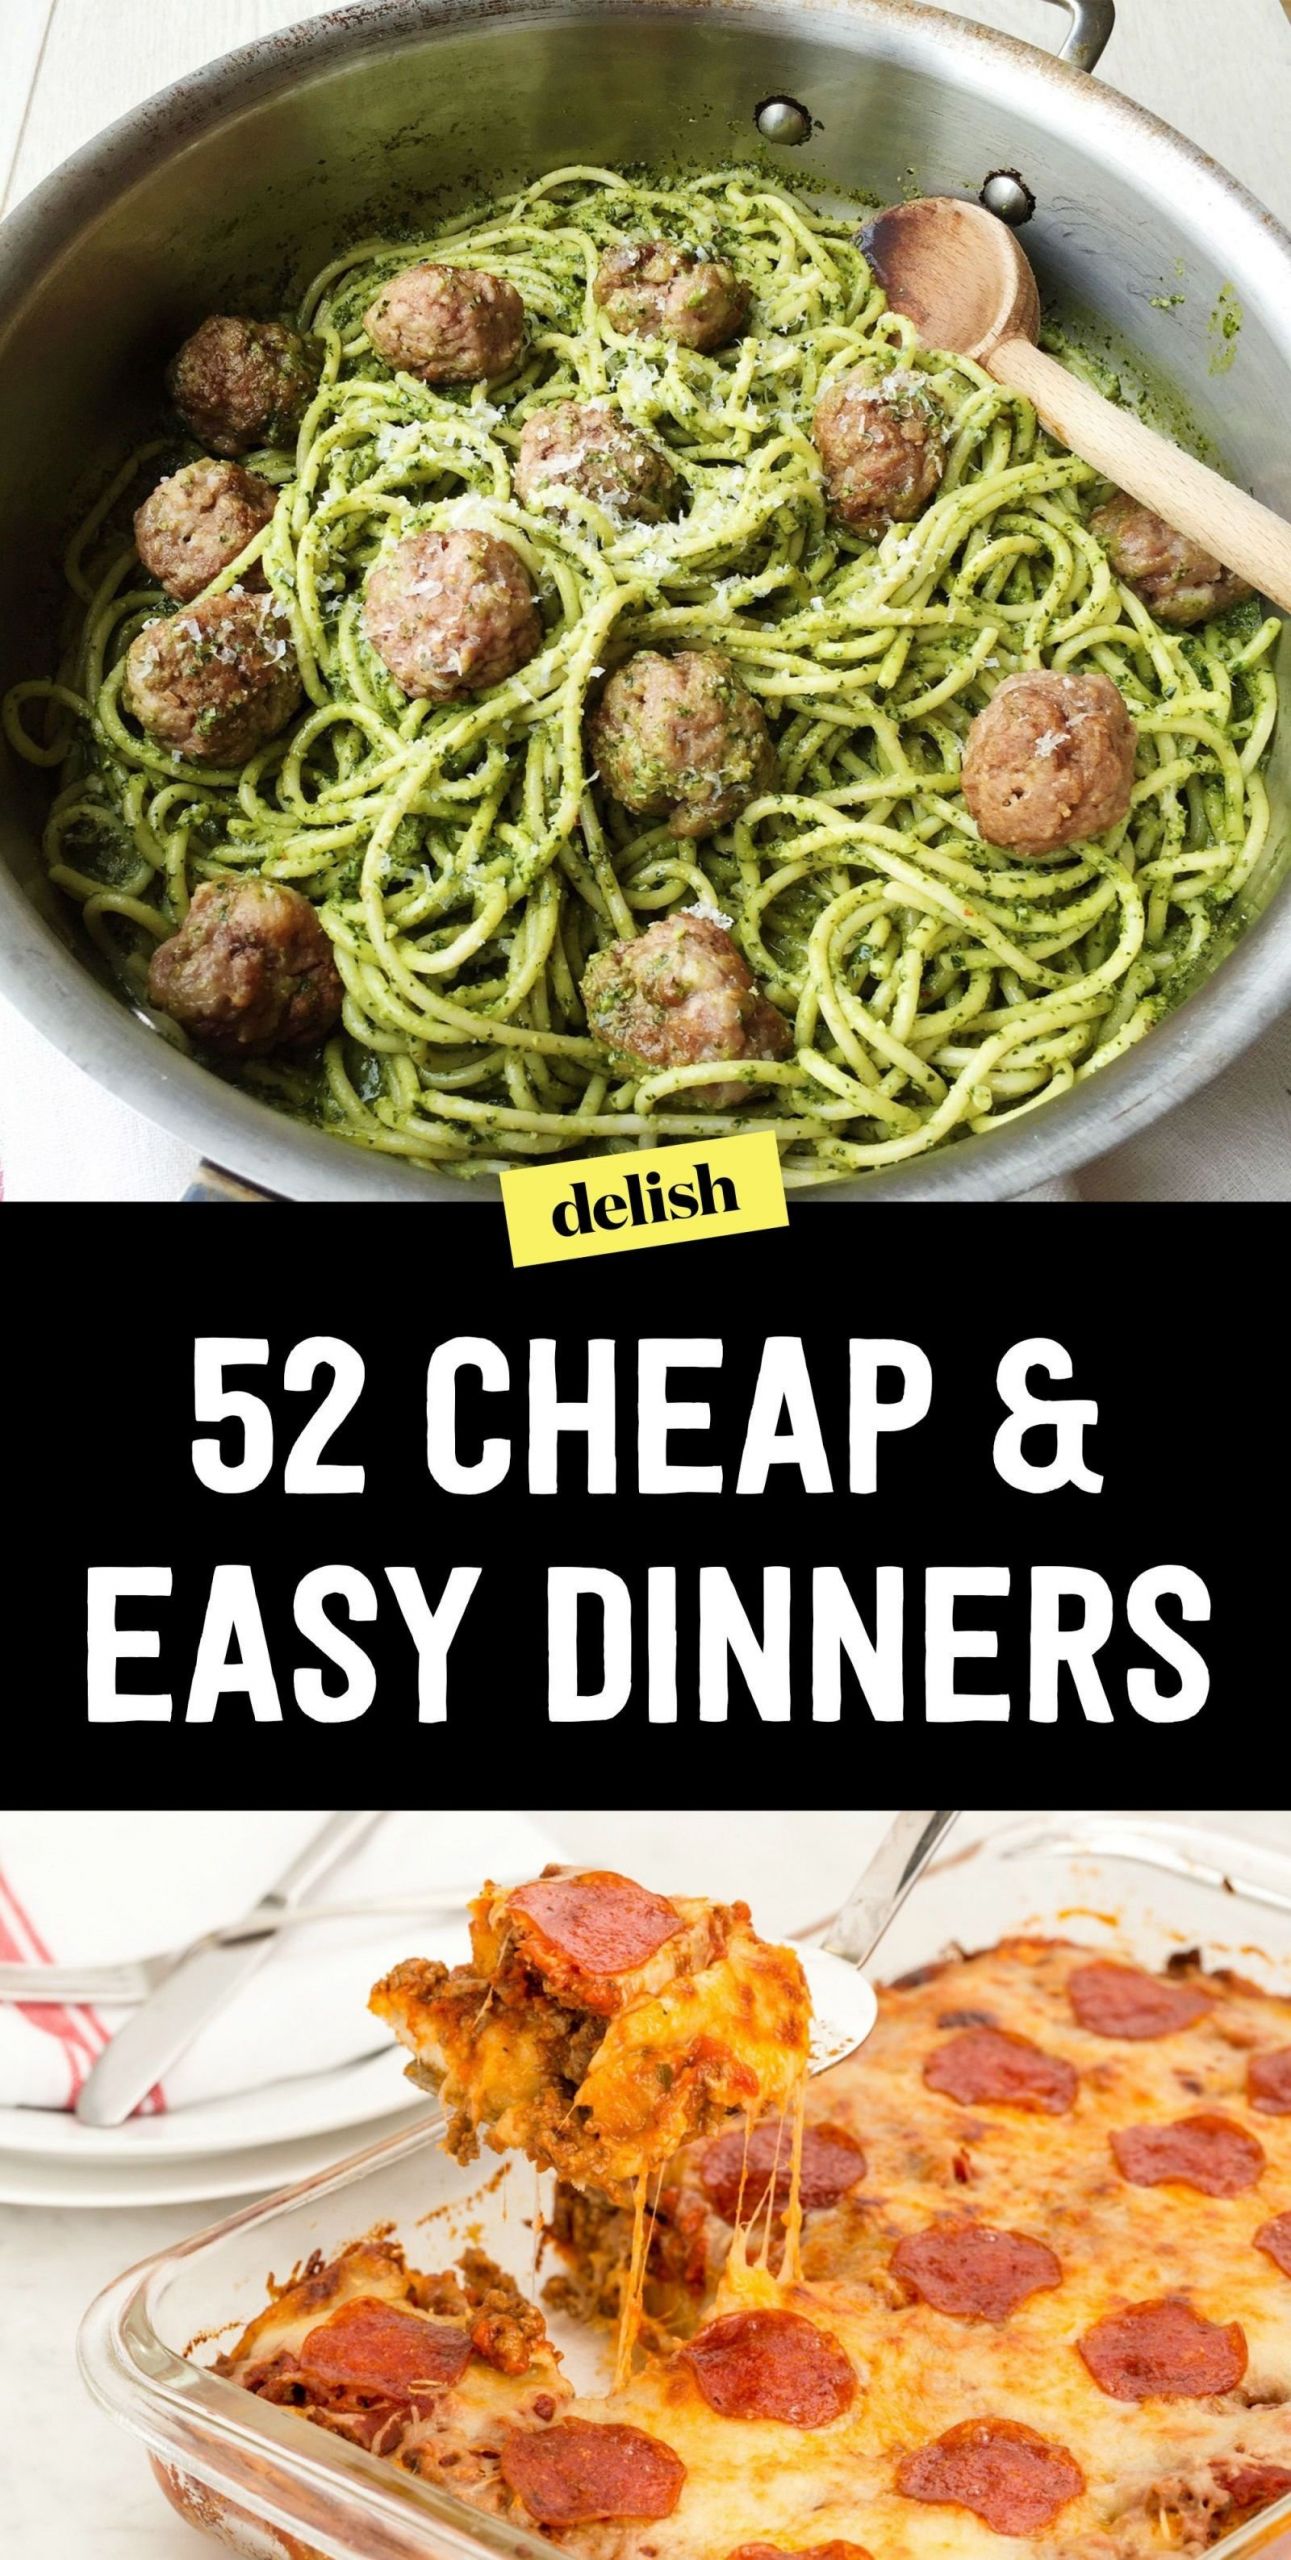 Cheap Dinner Ideas For 2
 10 Great Cheap Meal Ideas For 2 2019